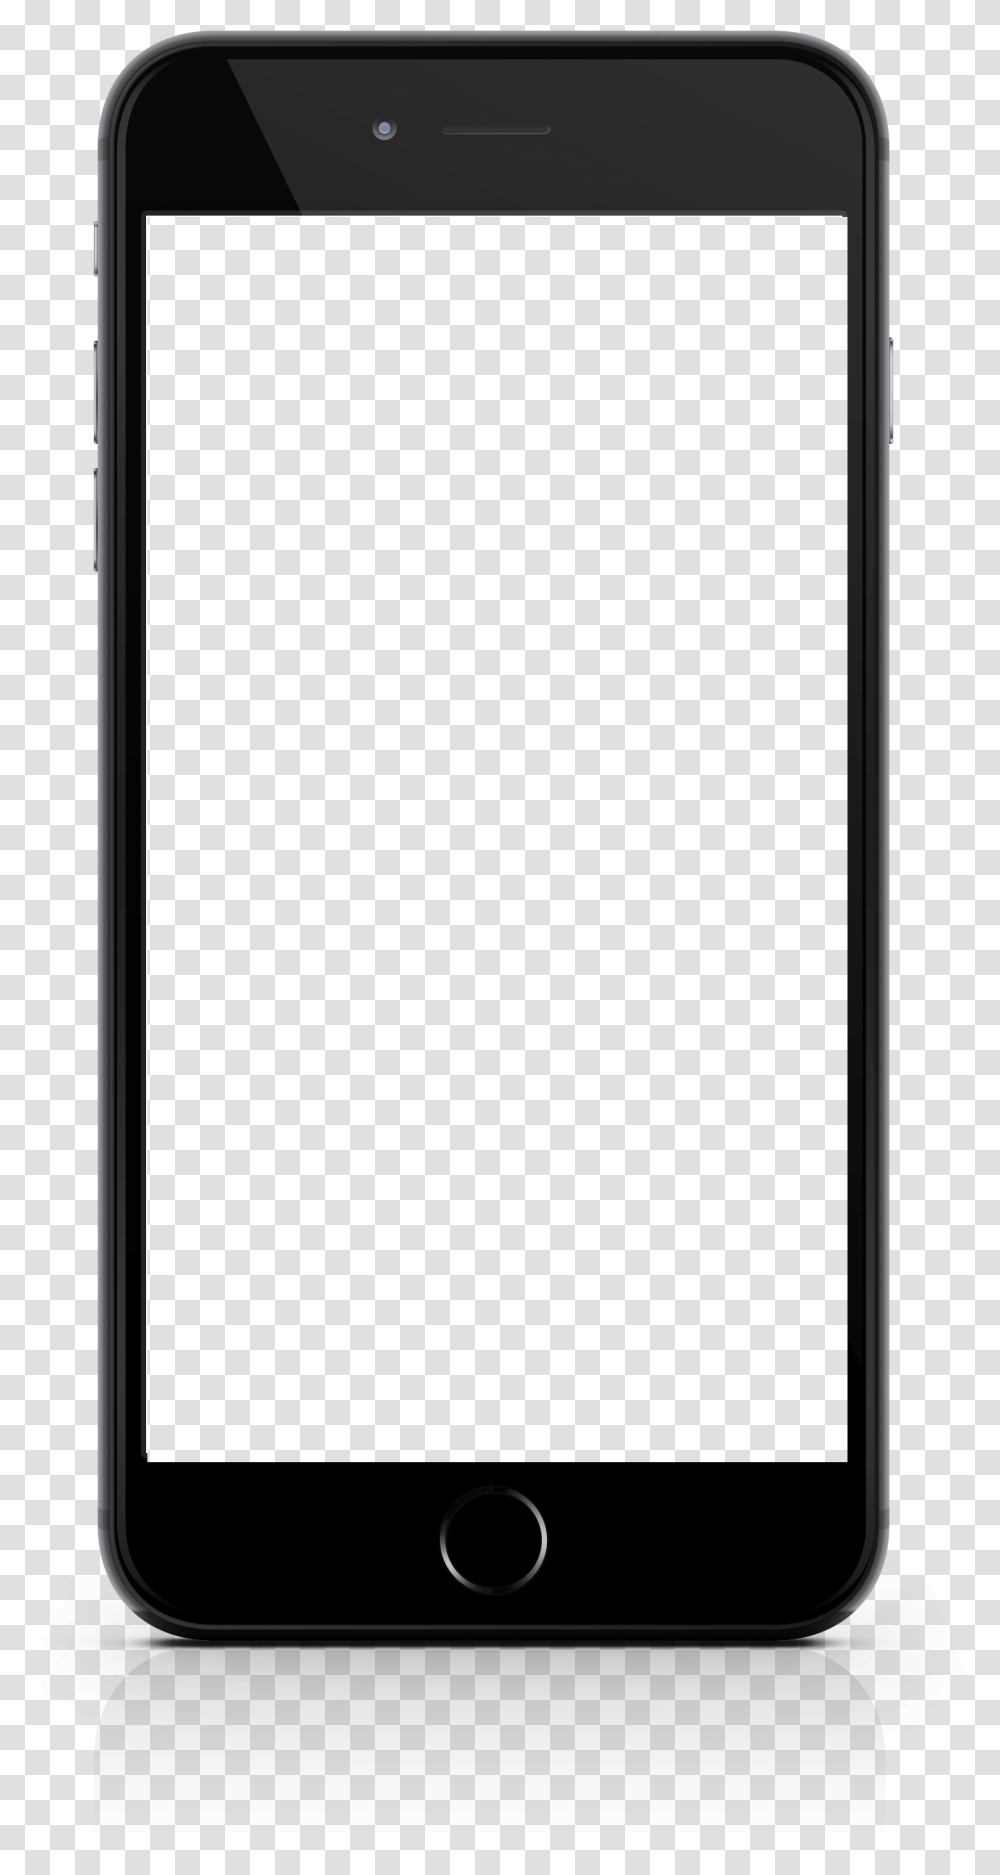 The Mobile View Phone, Mobile Phone, Electronics, Cell Phone, Iphone Transparent Png